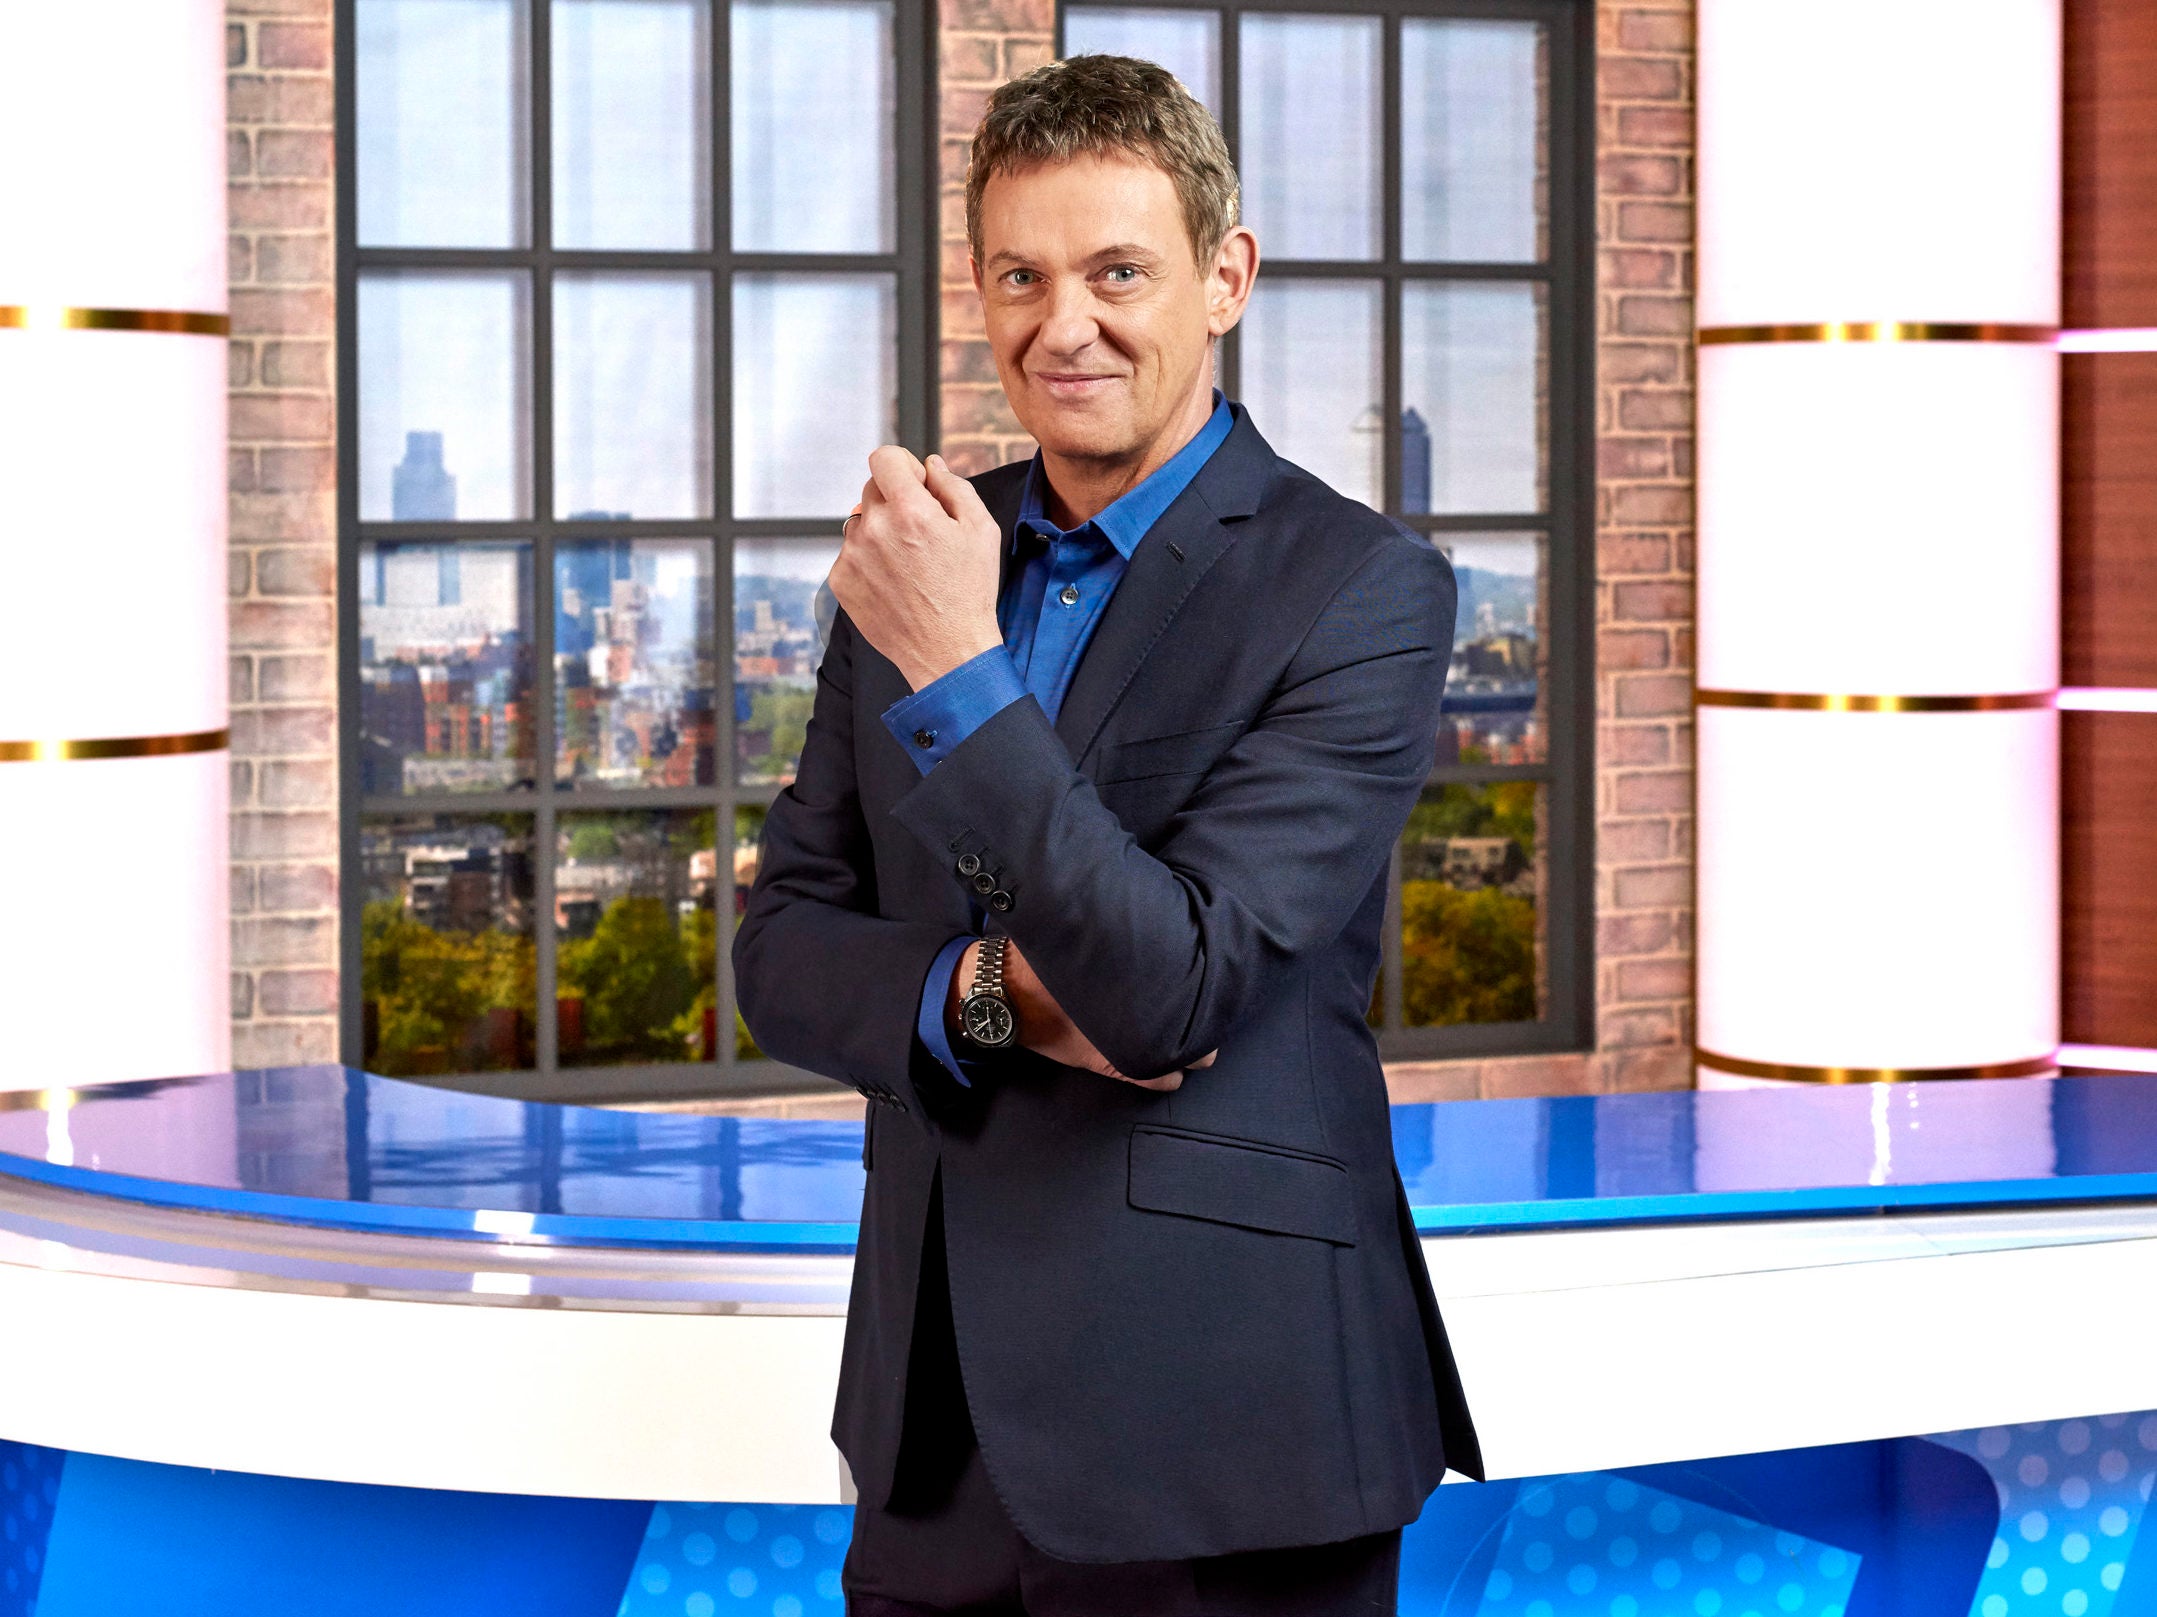 Matthew Wright leaves Channel 5 current affairs show The Wright Stuff after 18 years